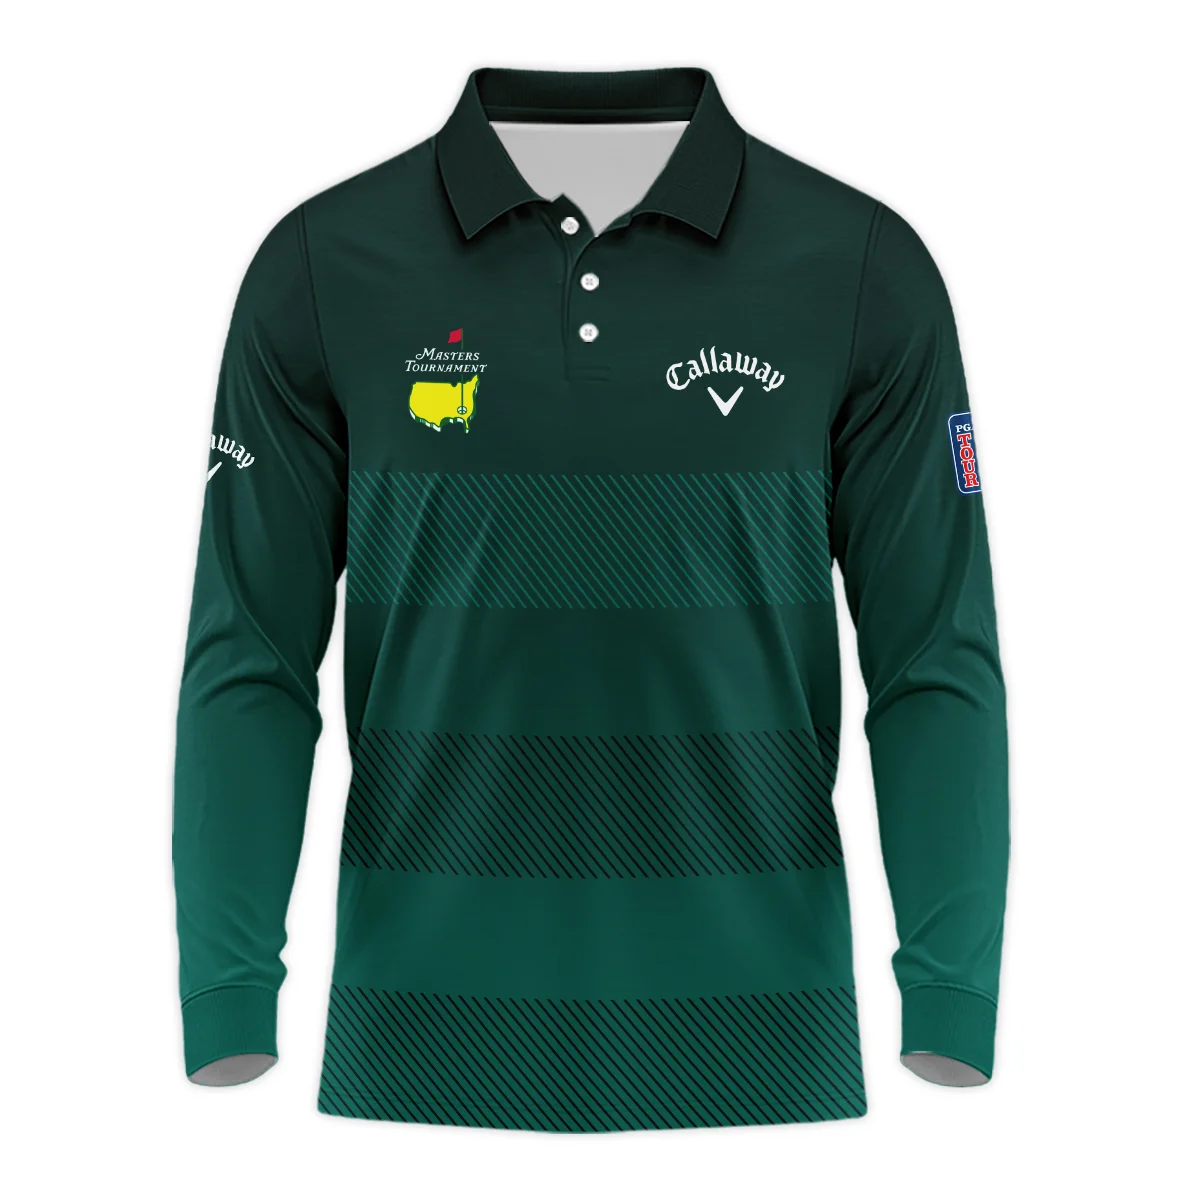 Callaway Masters Tournament Dark Green Gradient Stripes Pattern Golf Sport Vneck Polo Shirt Style Classic Polo Shirt For Men